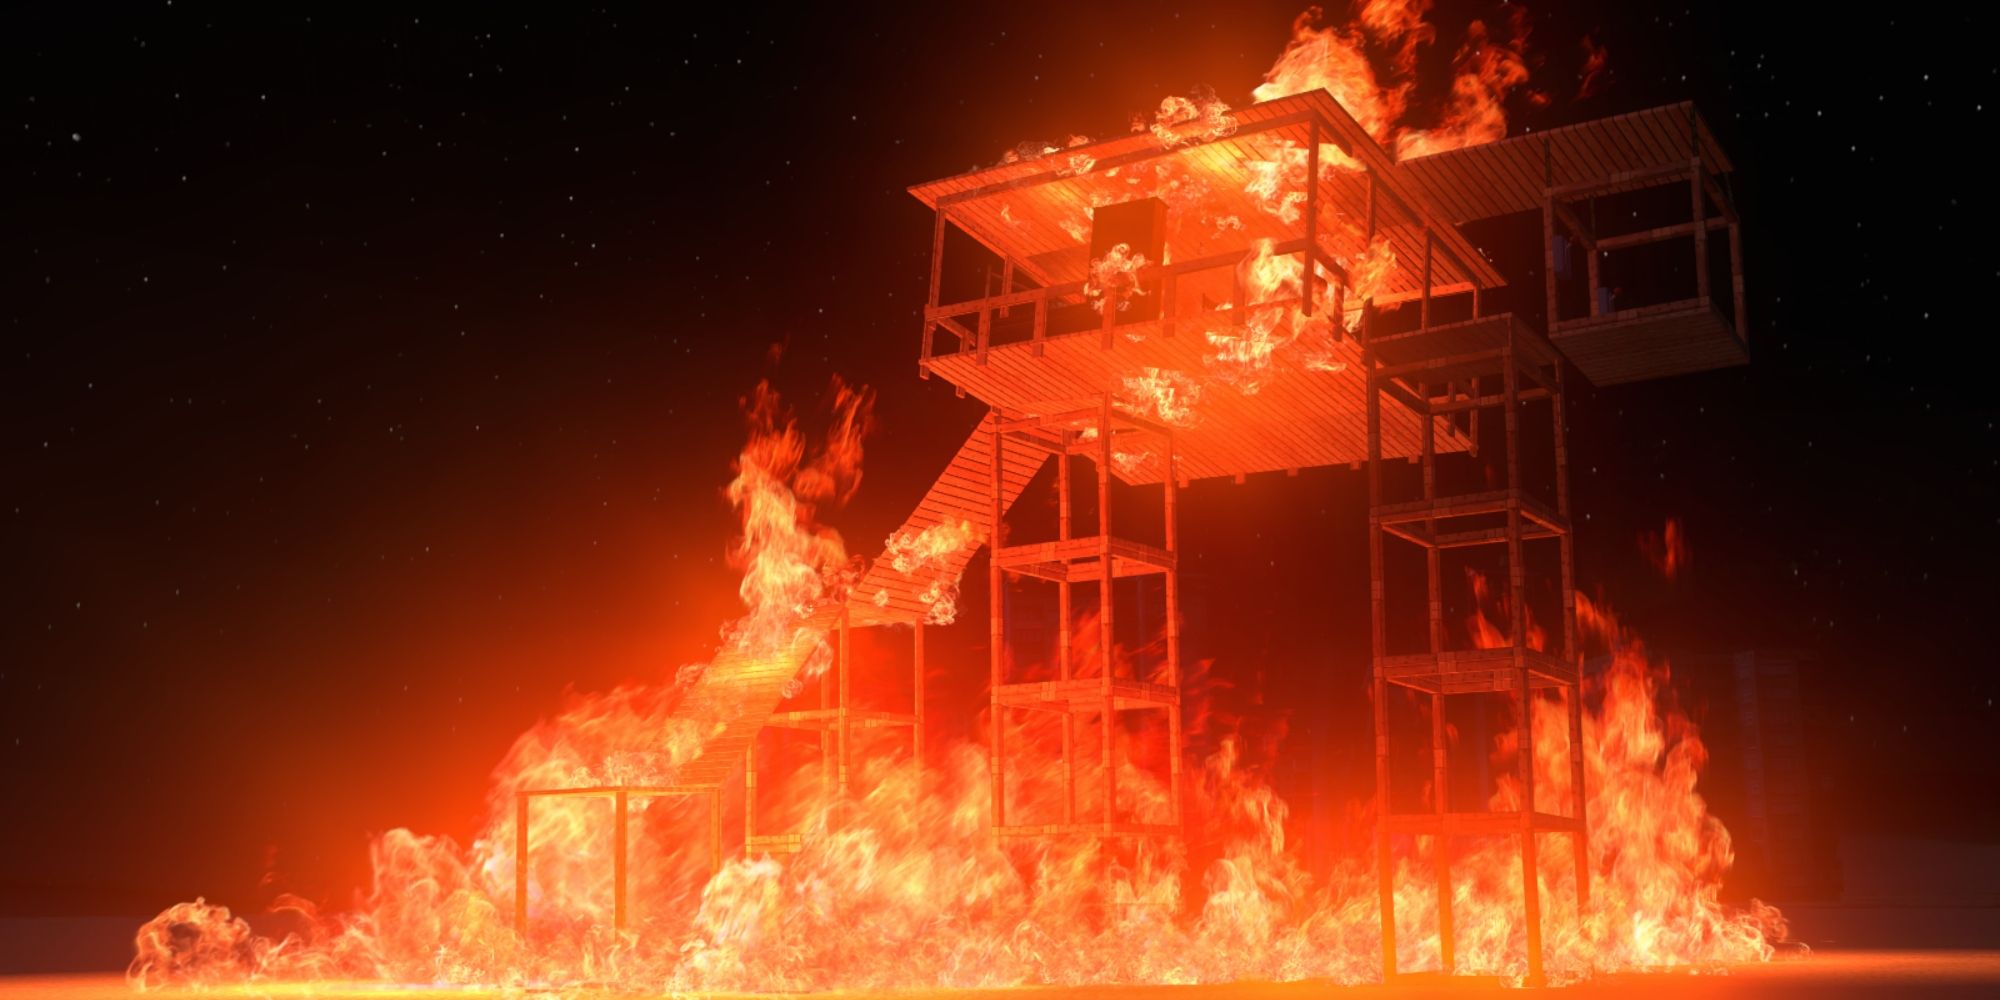 a tall, wooden structure completely engulfed in bright orange flames